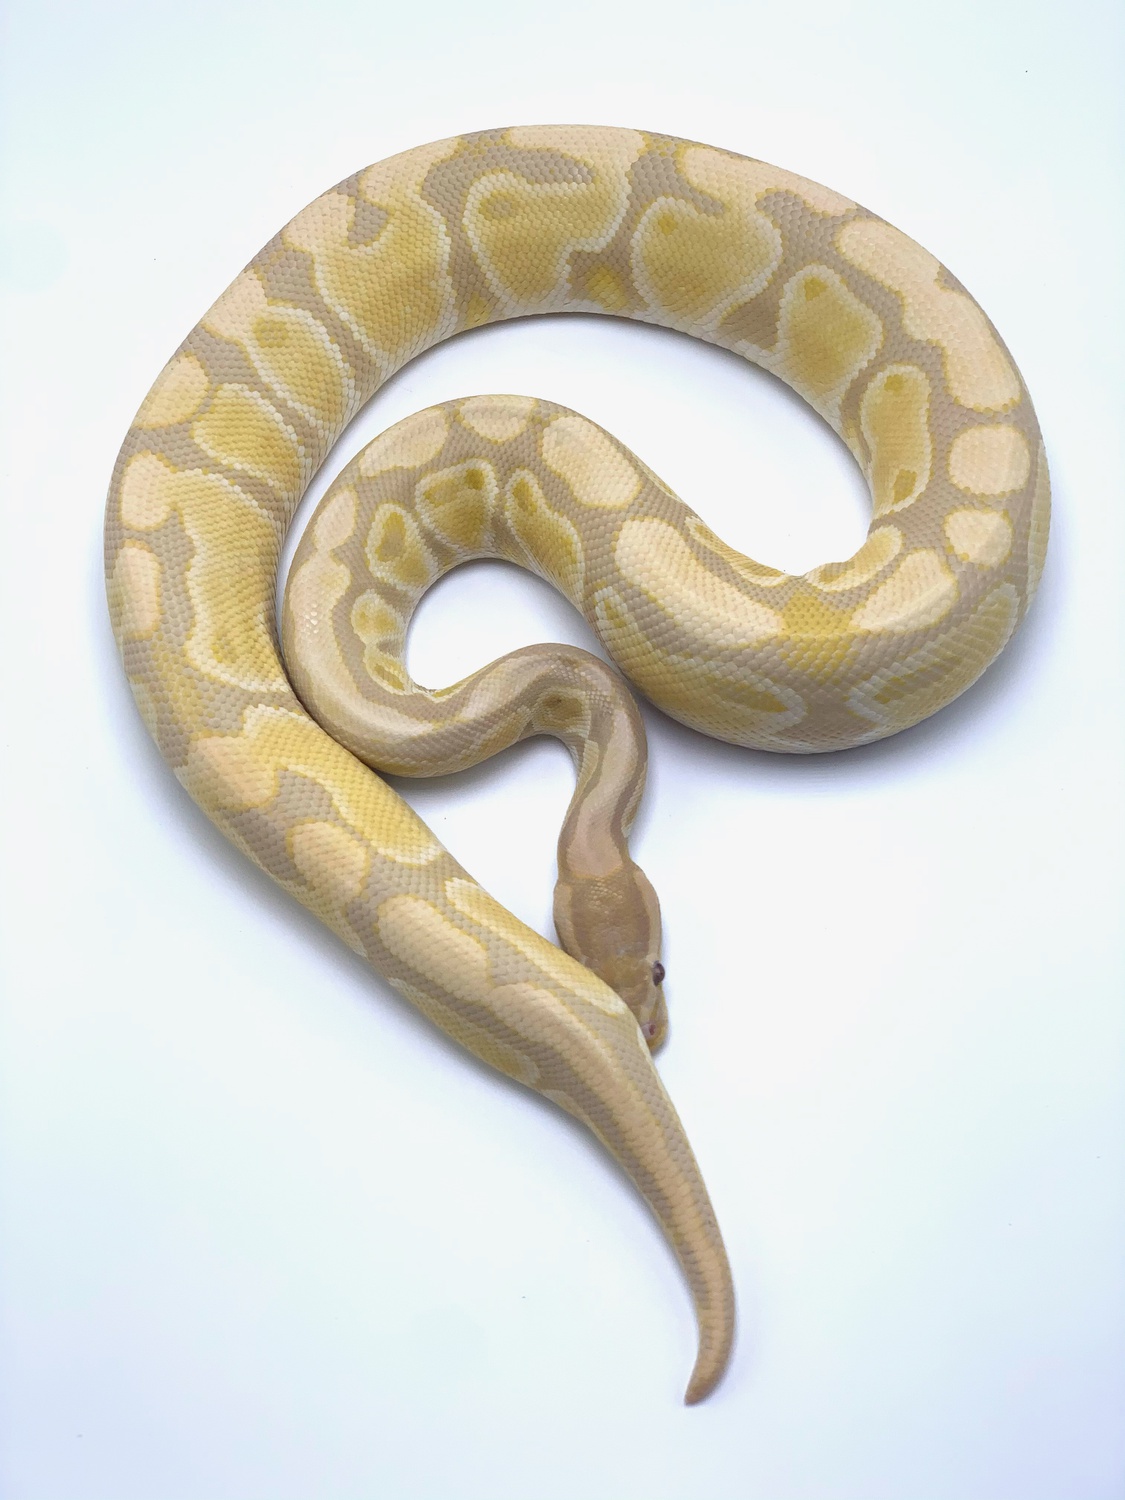 Rainbow Ball Python by I Candy Morphs